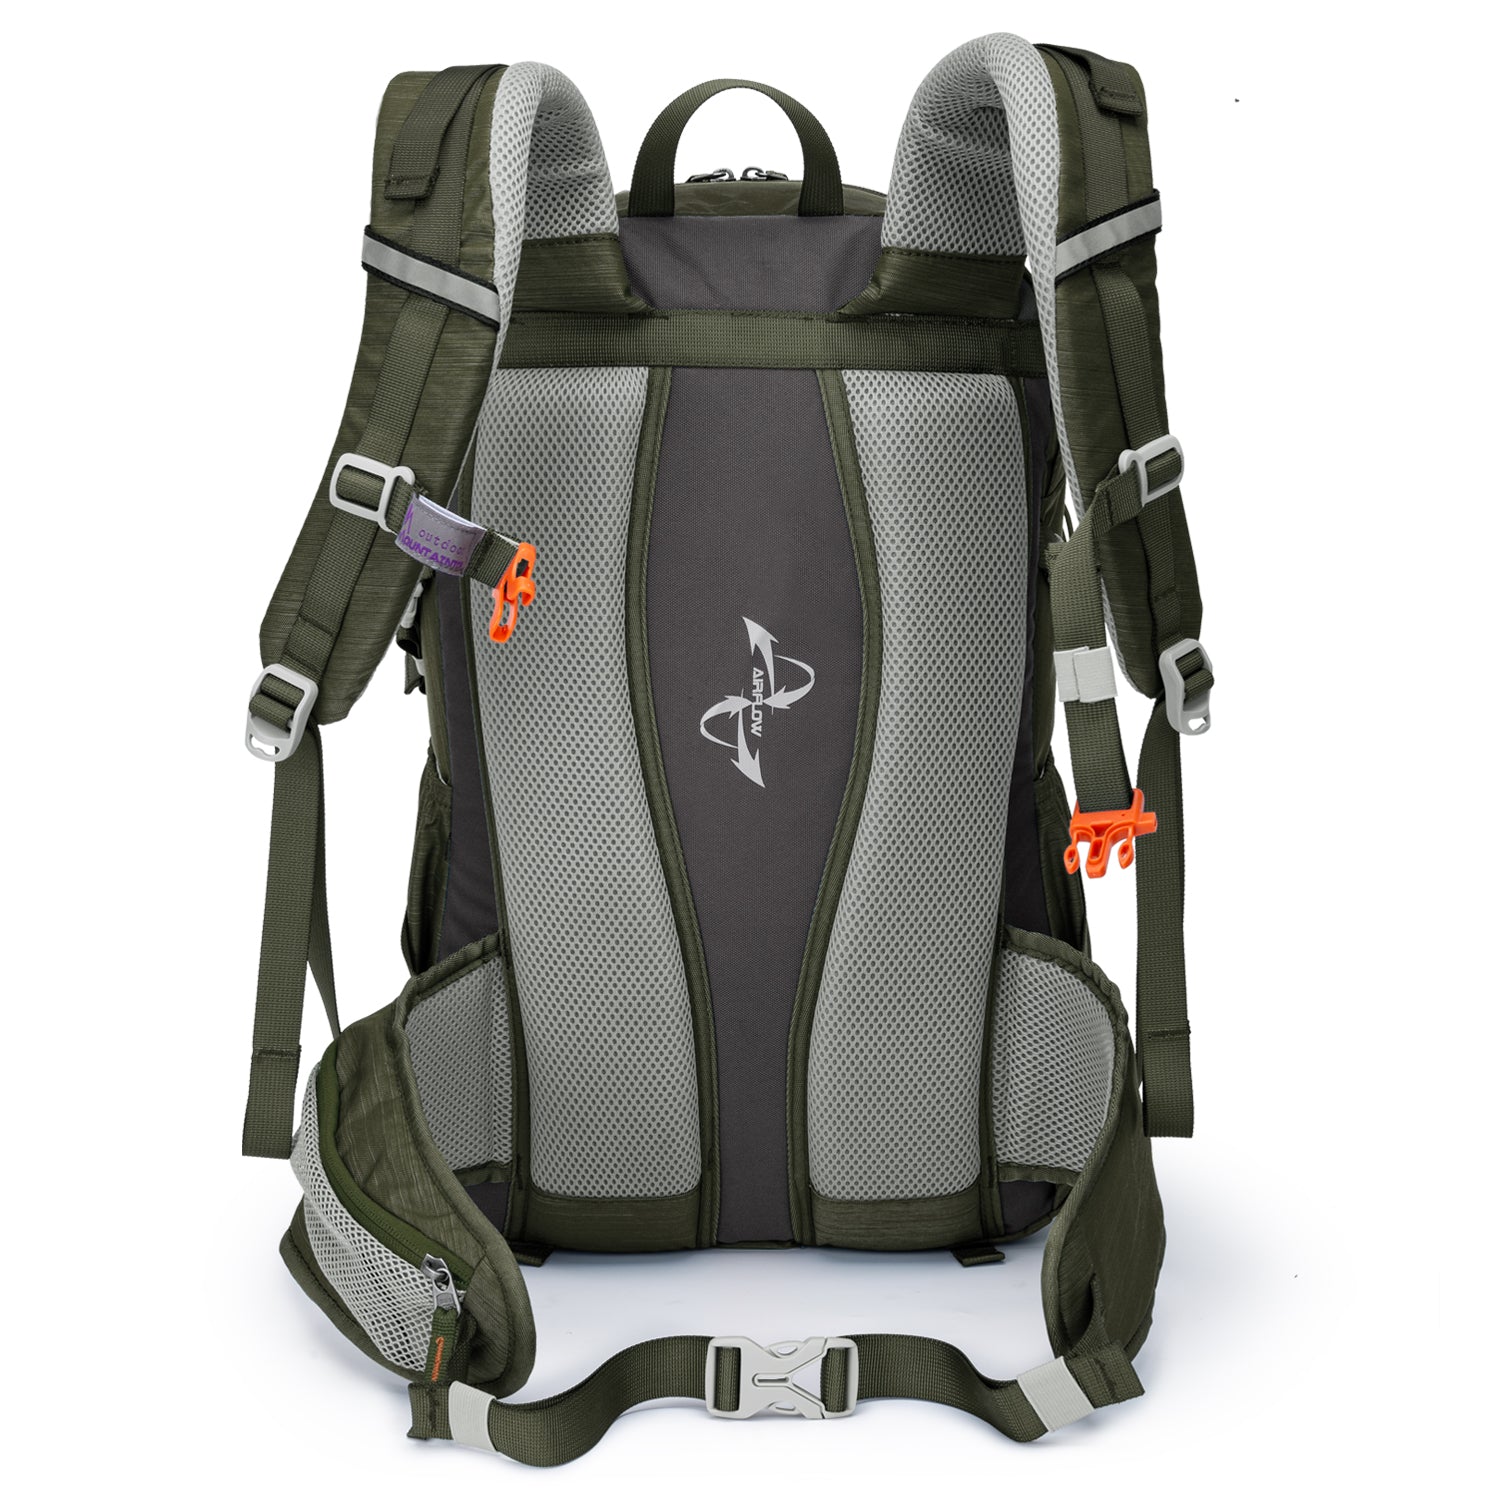 Functional backpack,Breathable Bearing System,small hiking backpack